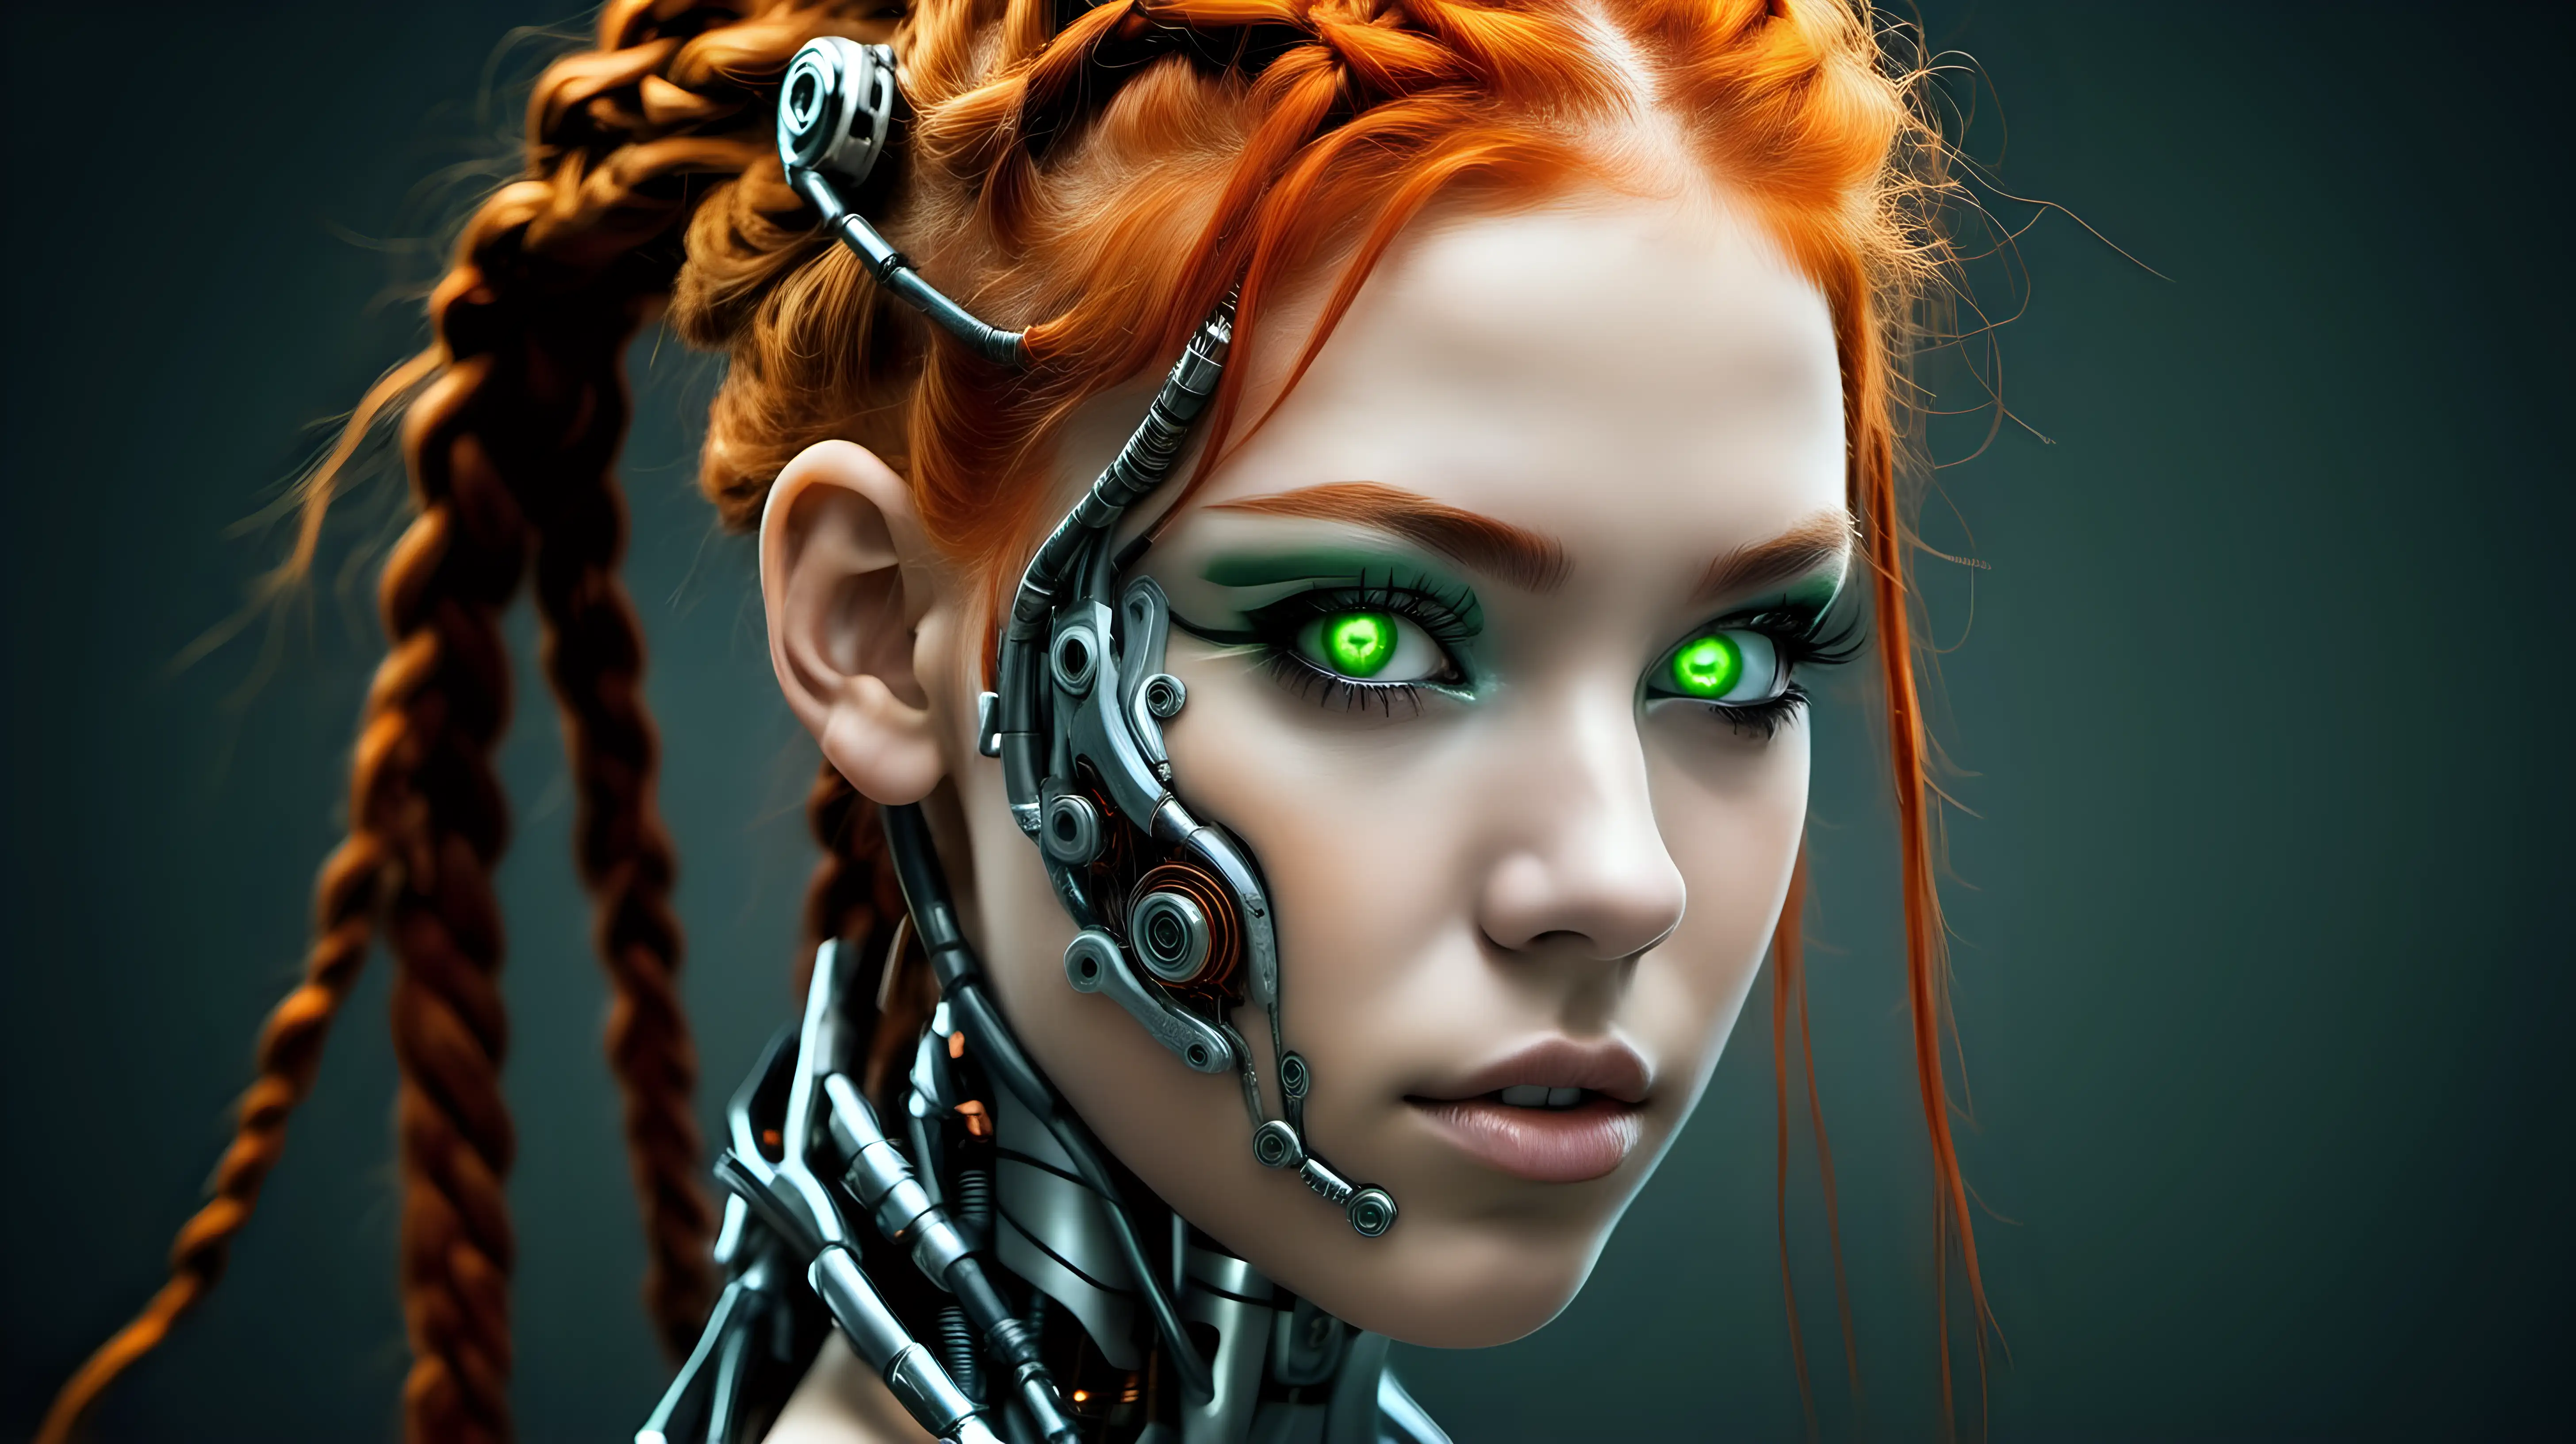 Stunning Cyborg Woman with Vibrant Orange Hair and Green Eyes